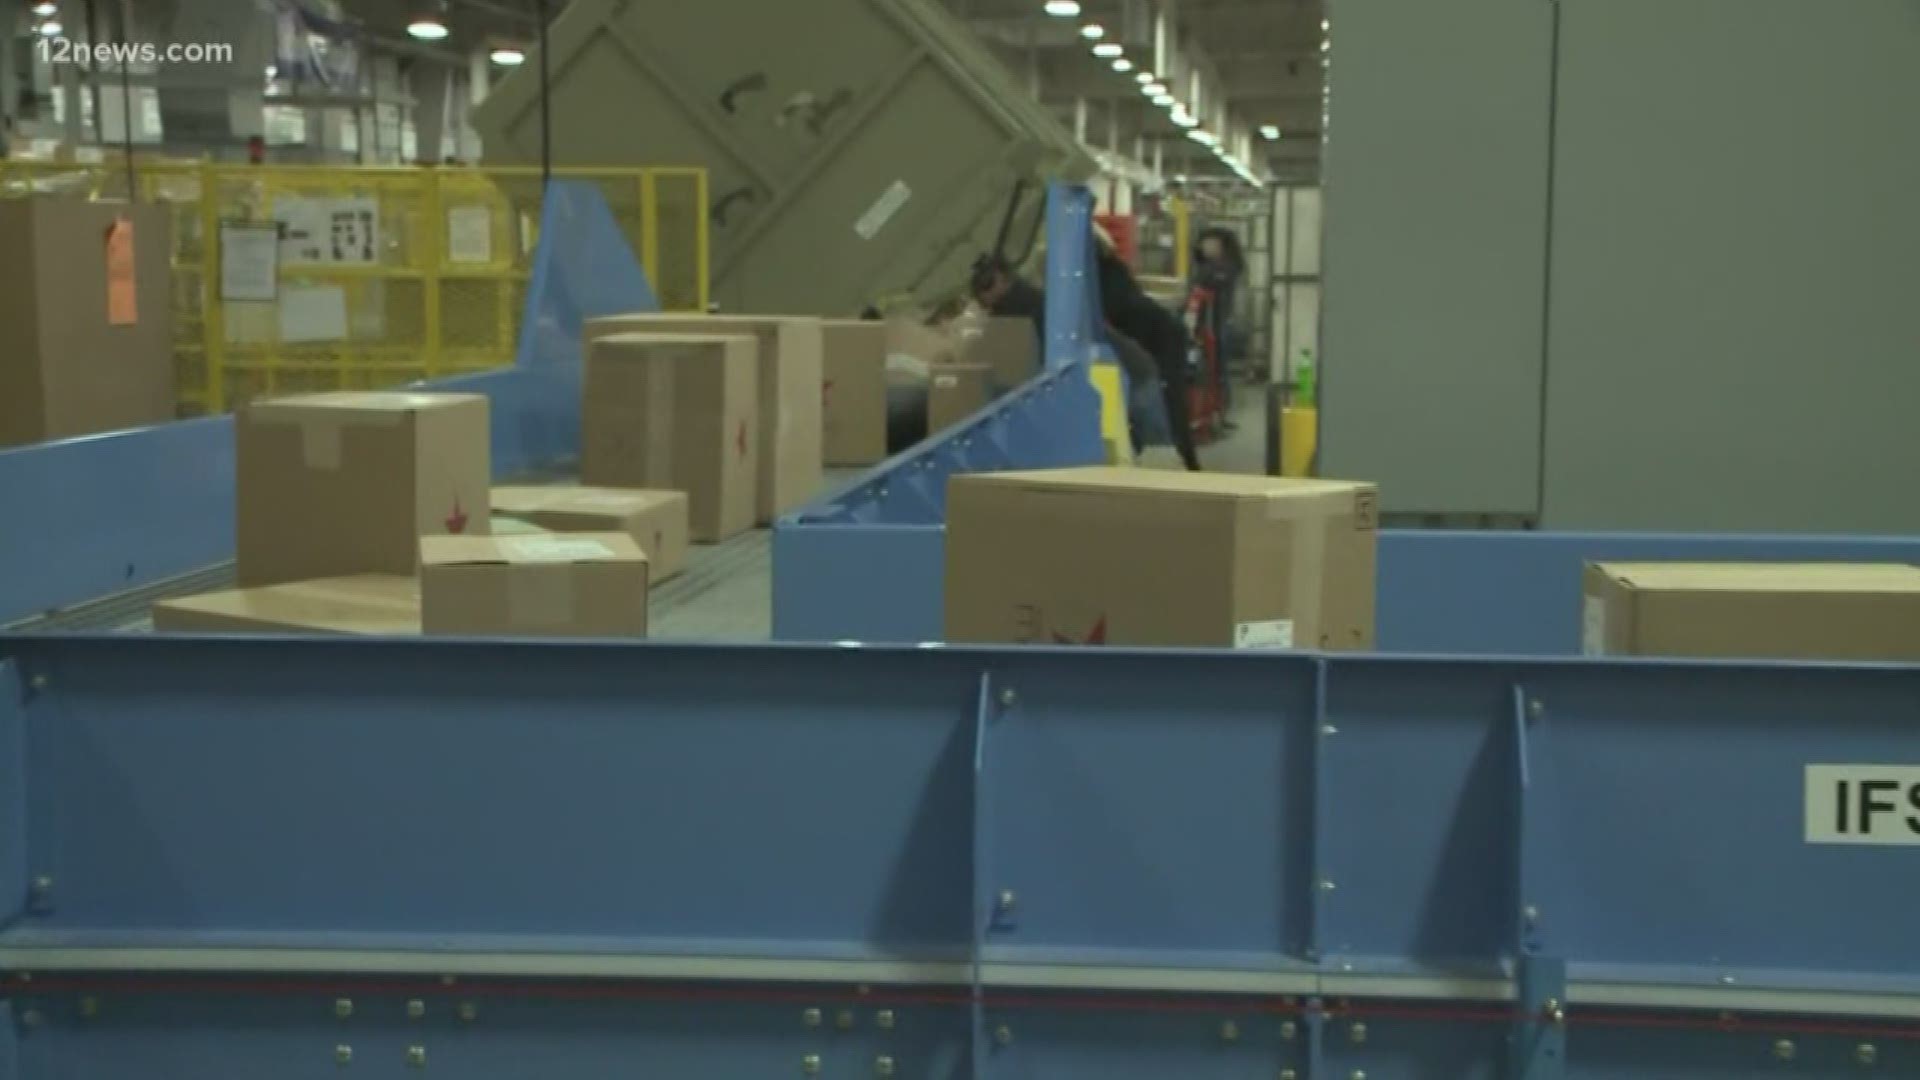 Next week is the busiest time of the year for the USPS. We give you a behind the scenes look at a USPS processing center just before the center is expected to go into overdrive.